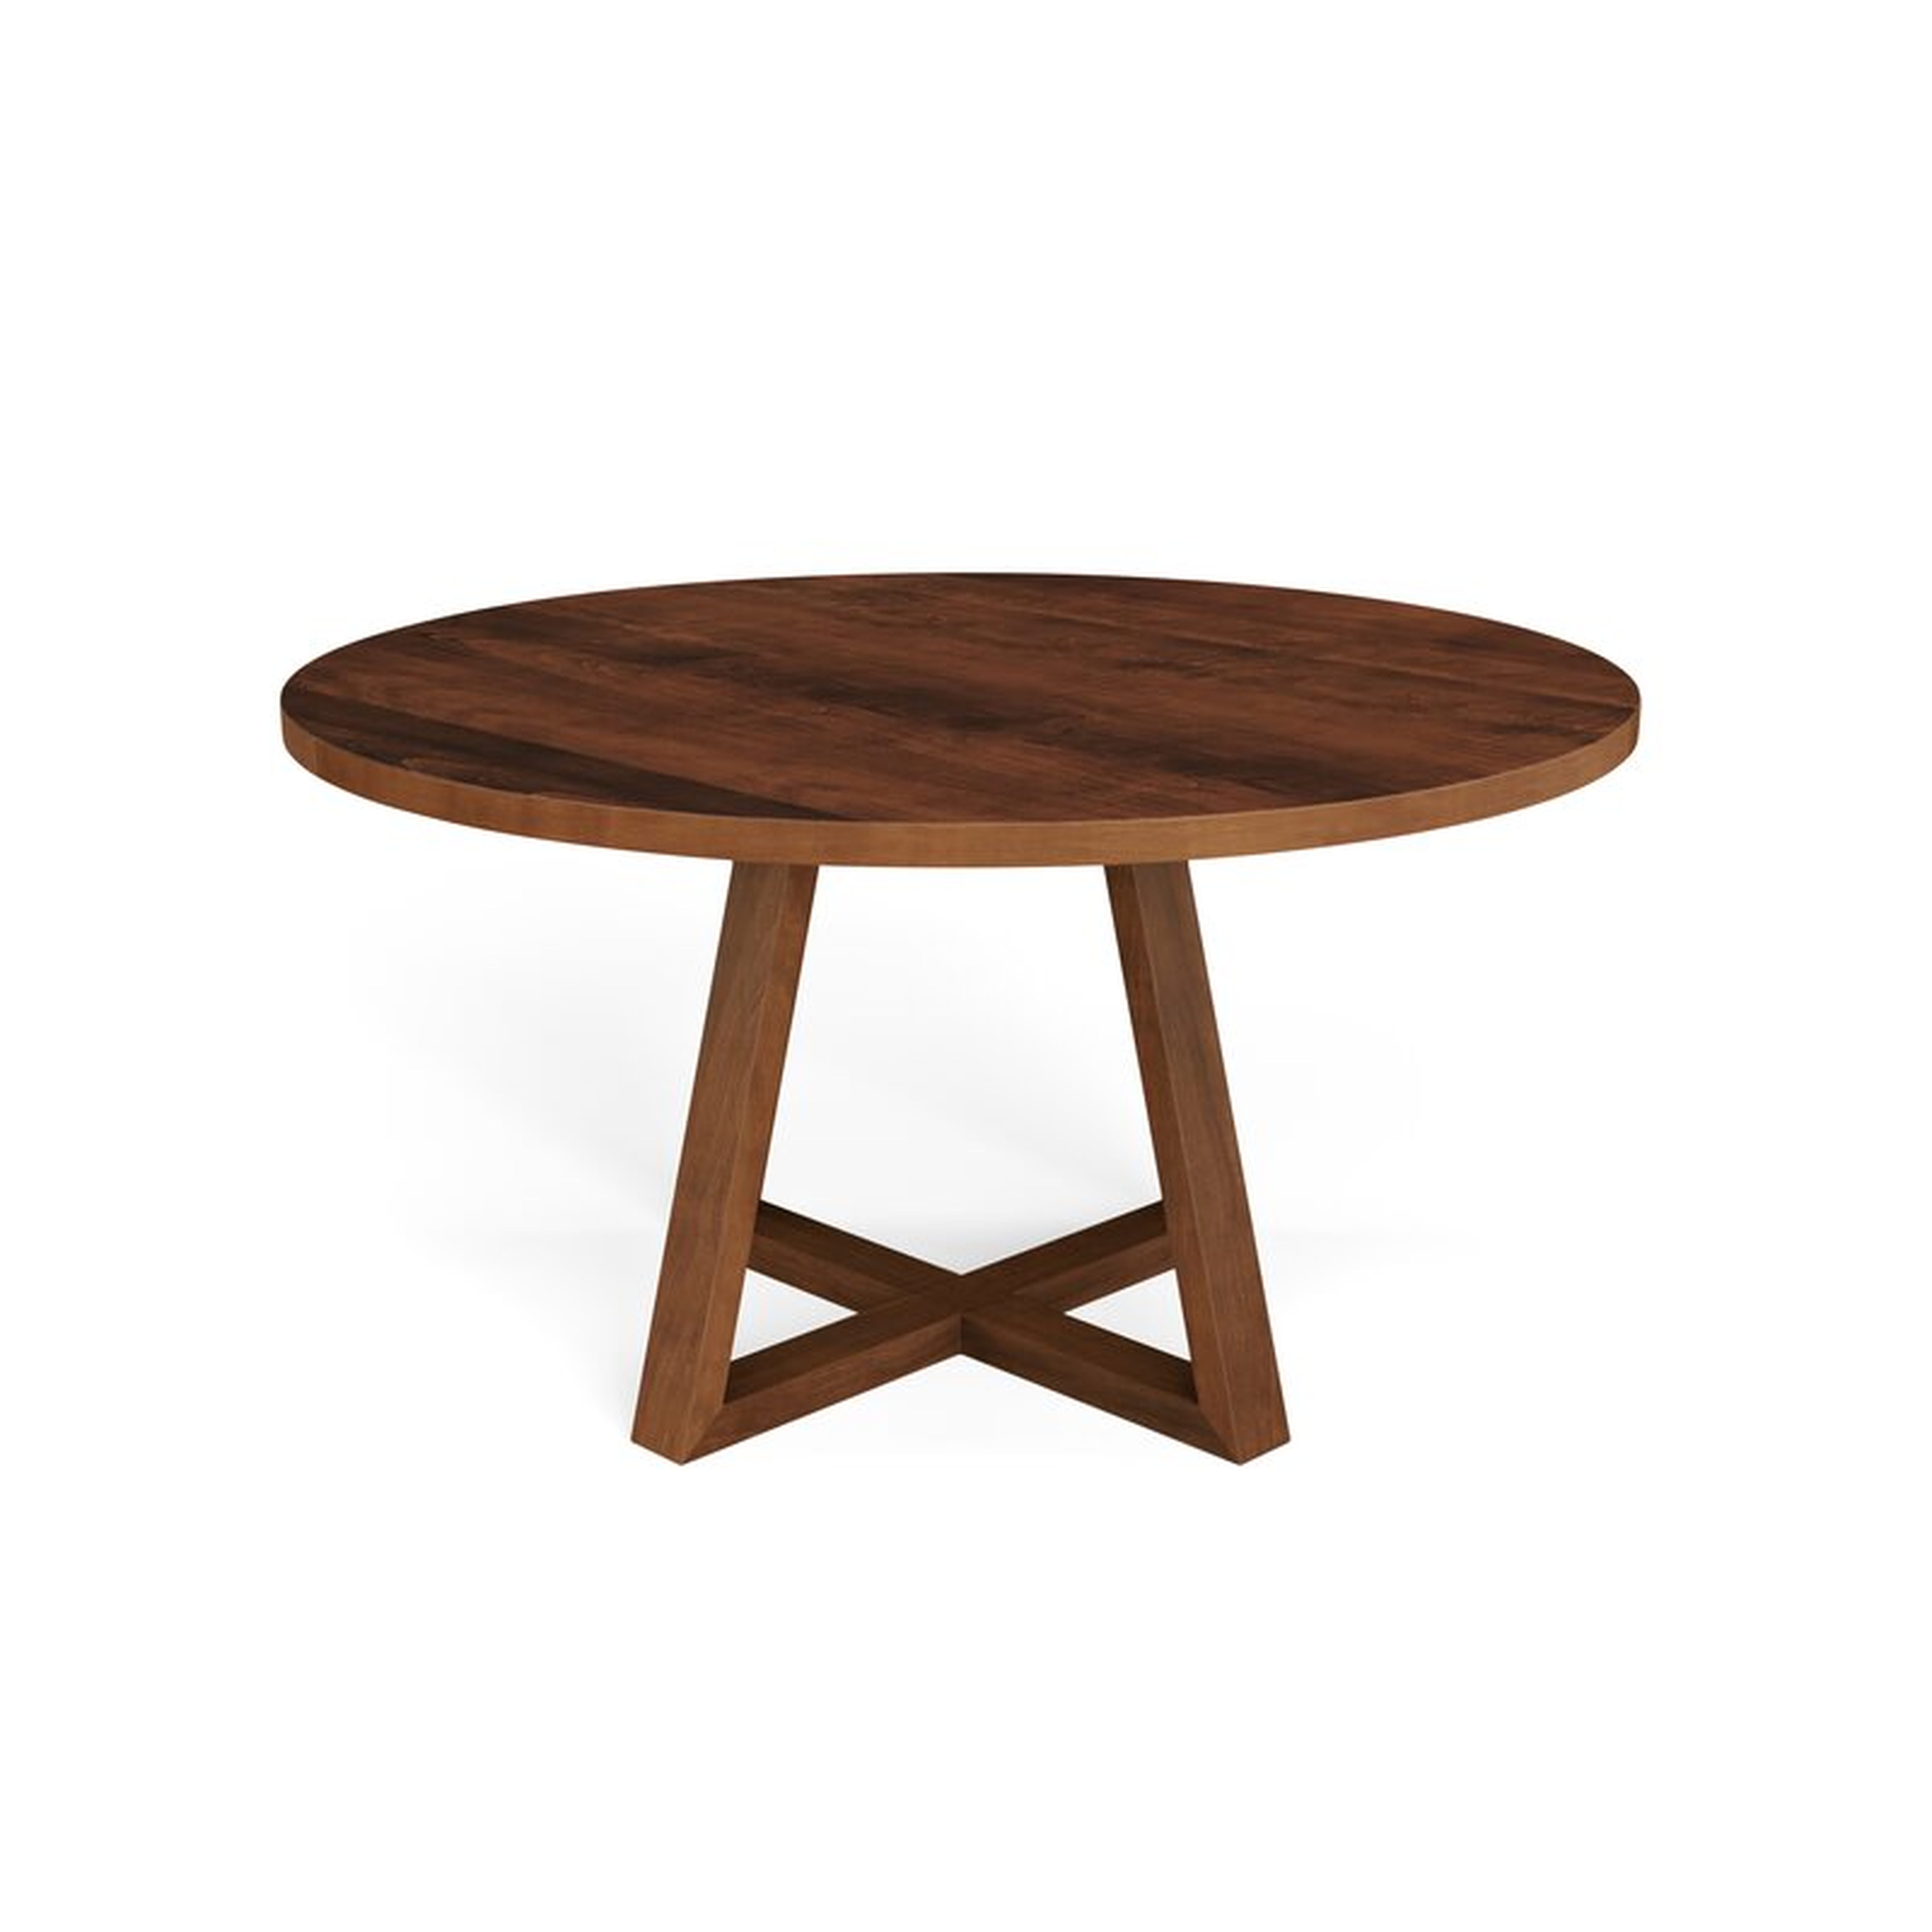 Kandace Dining Table Color: Walnut, Size: 29" H x 42" L x 42" W - Perigold